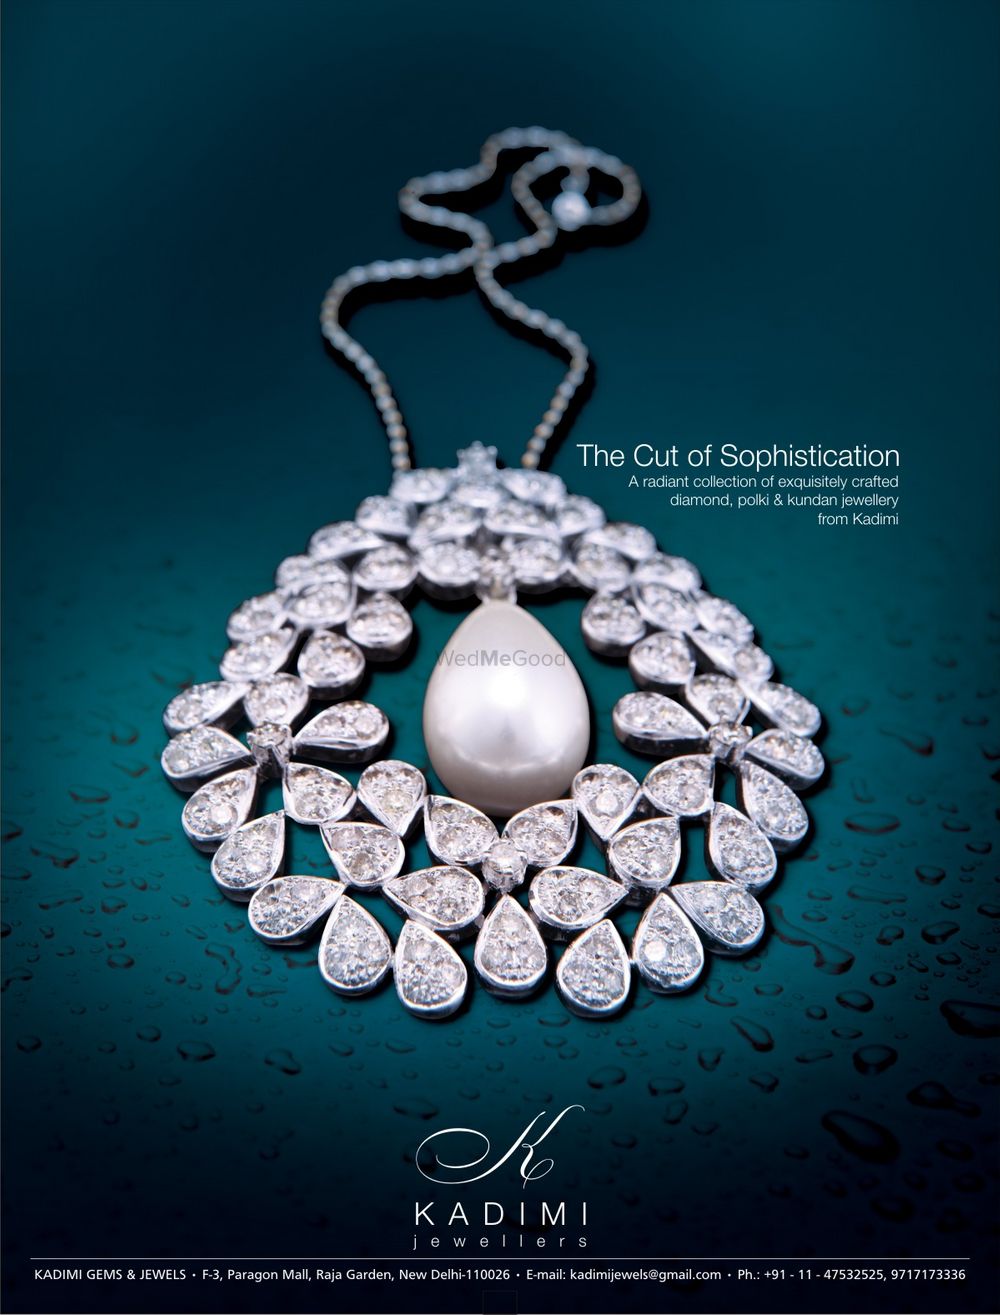 Photo From Dazzling Diamond collection - By Kadimi Jewellers